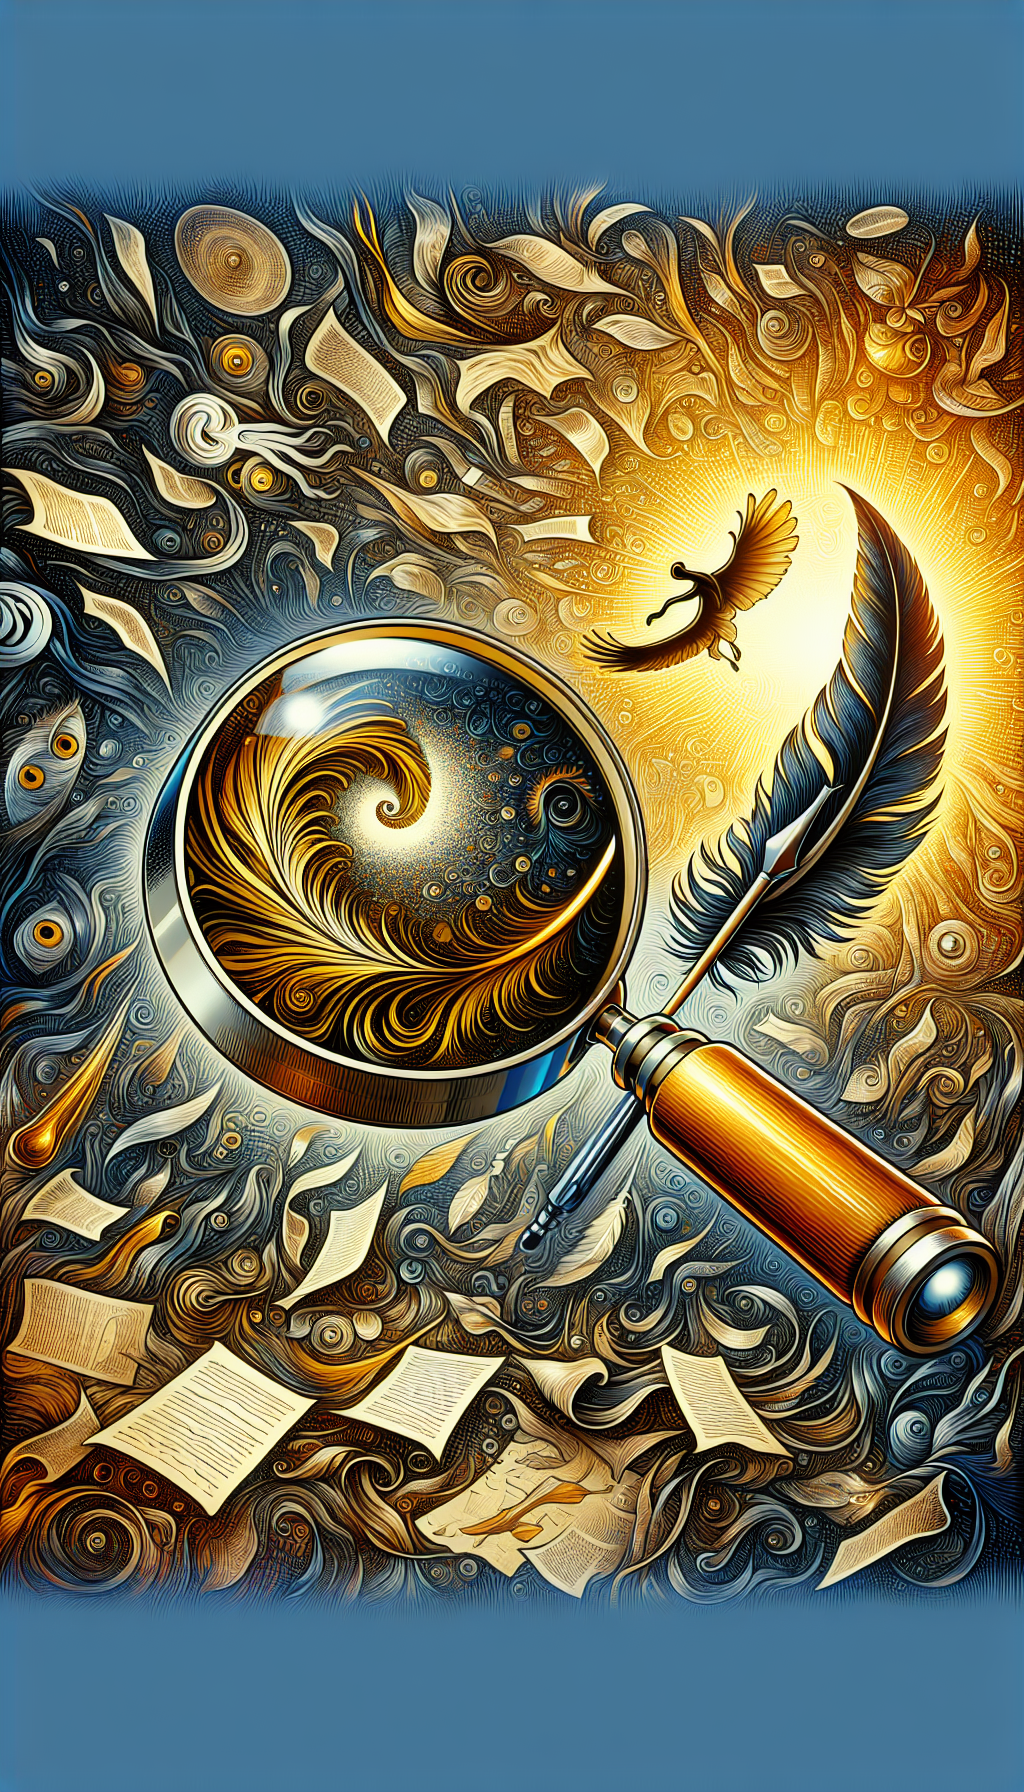 An intricate illustration depicting an art detective magnifying glass morphed into an elegant, flourishing quill pen; through its lens, detailed brushstrokes unfurl into a shimmering, authenticated masterpiece valuation tag. The chaotic background transitions seamlessly from analytical fingerprints to glowing, golden words of praise, symbolizing the meticulous journey from art authentication to wholehearted appreciation.